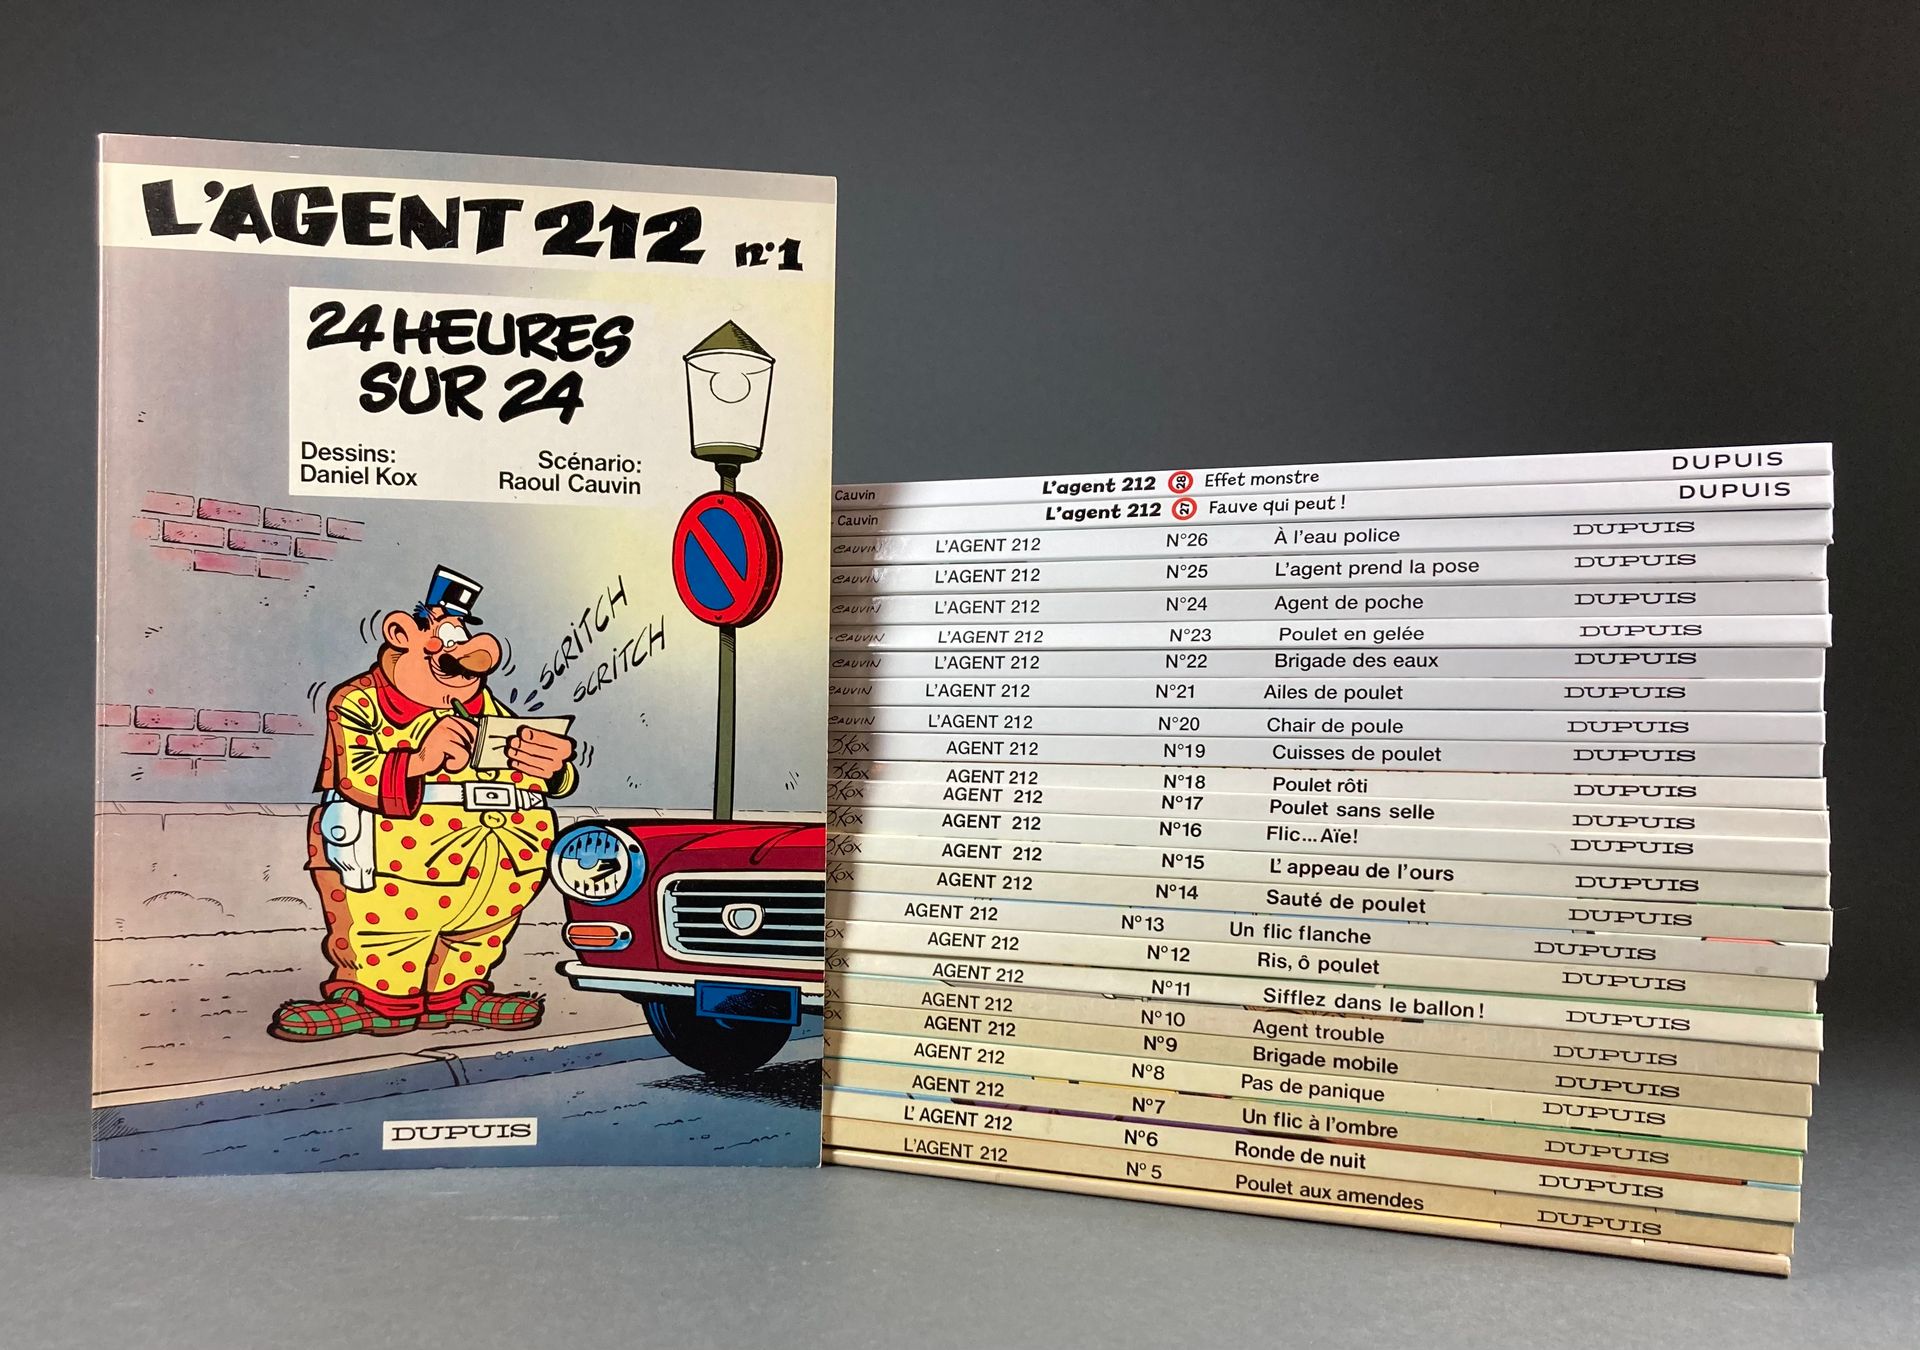 Kox D. - Agent 212 Volumes 1 to 28 (except 3), from 24 heures sur 24 (1981) to E&hellip;